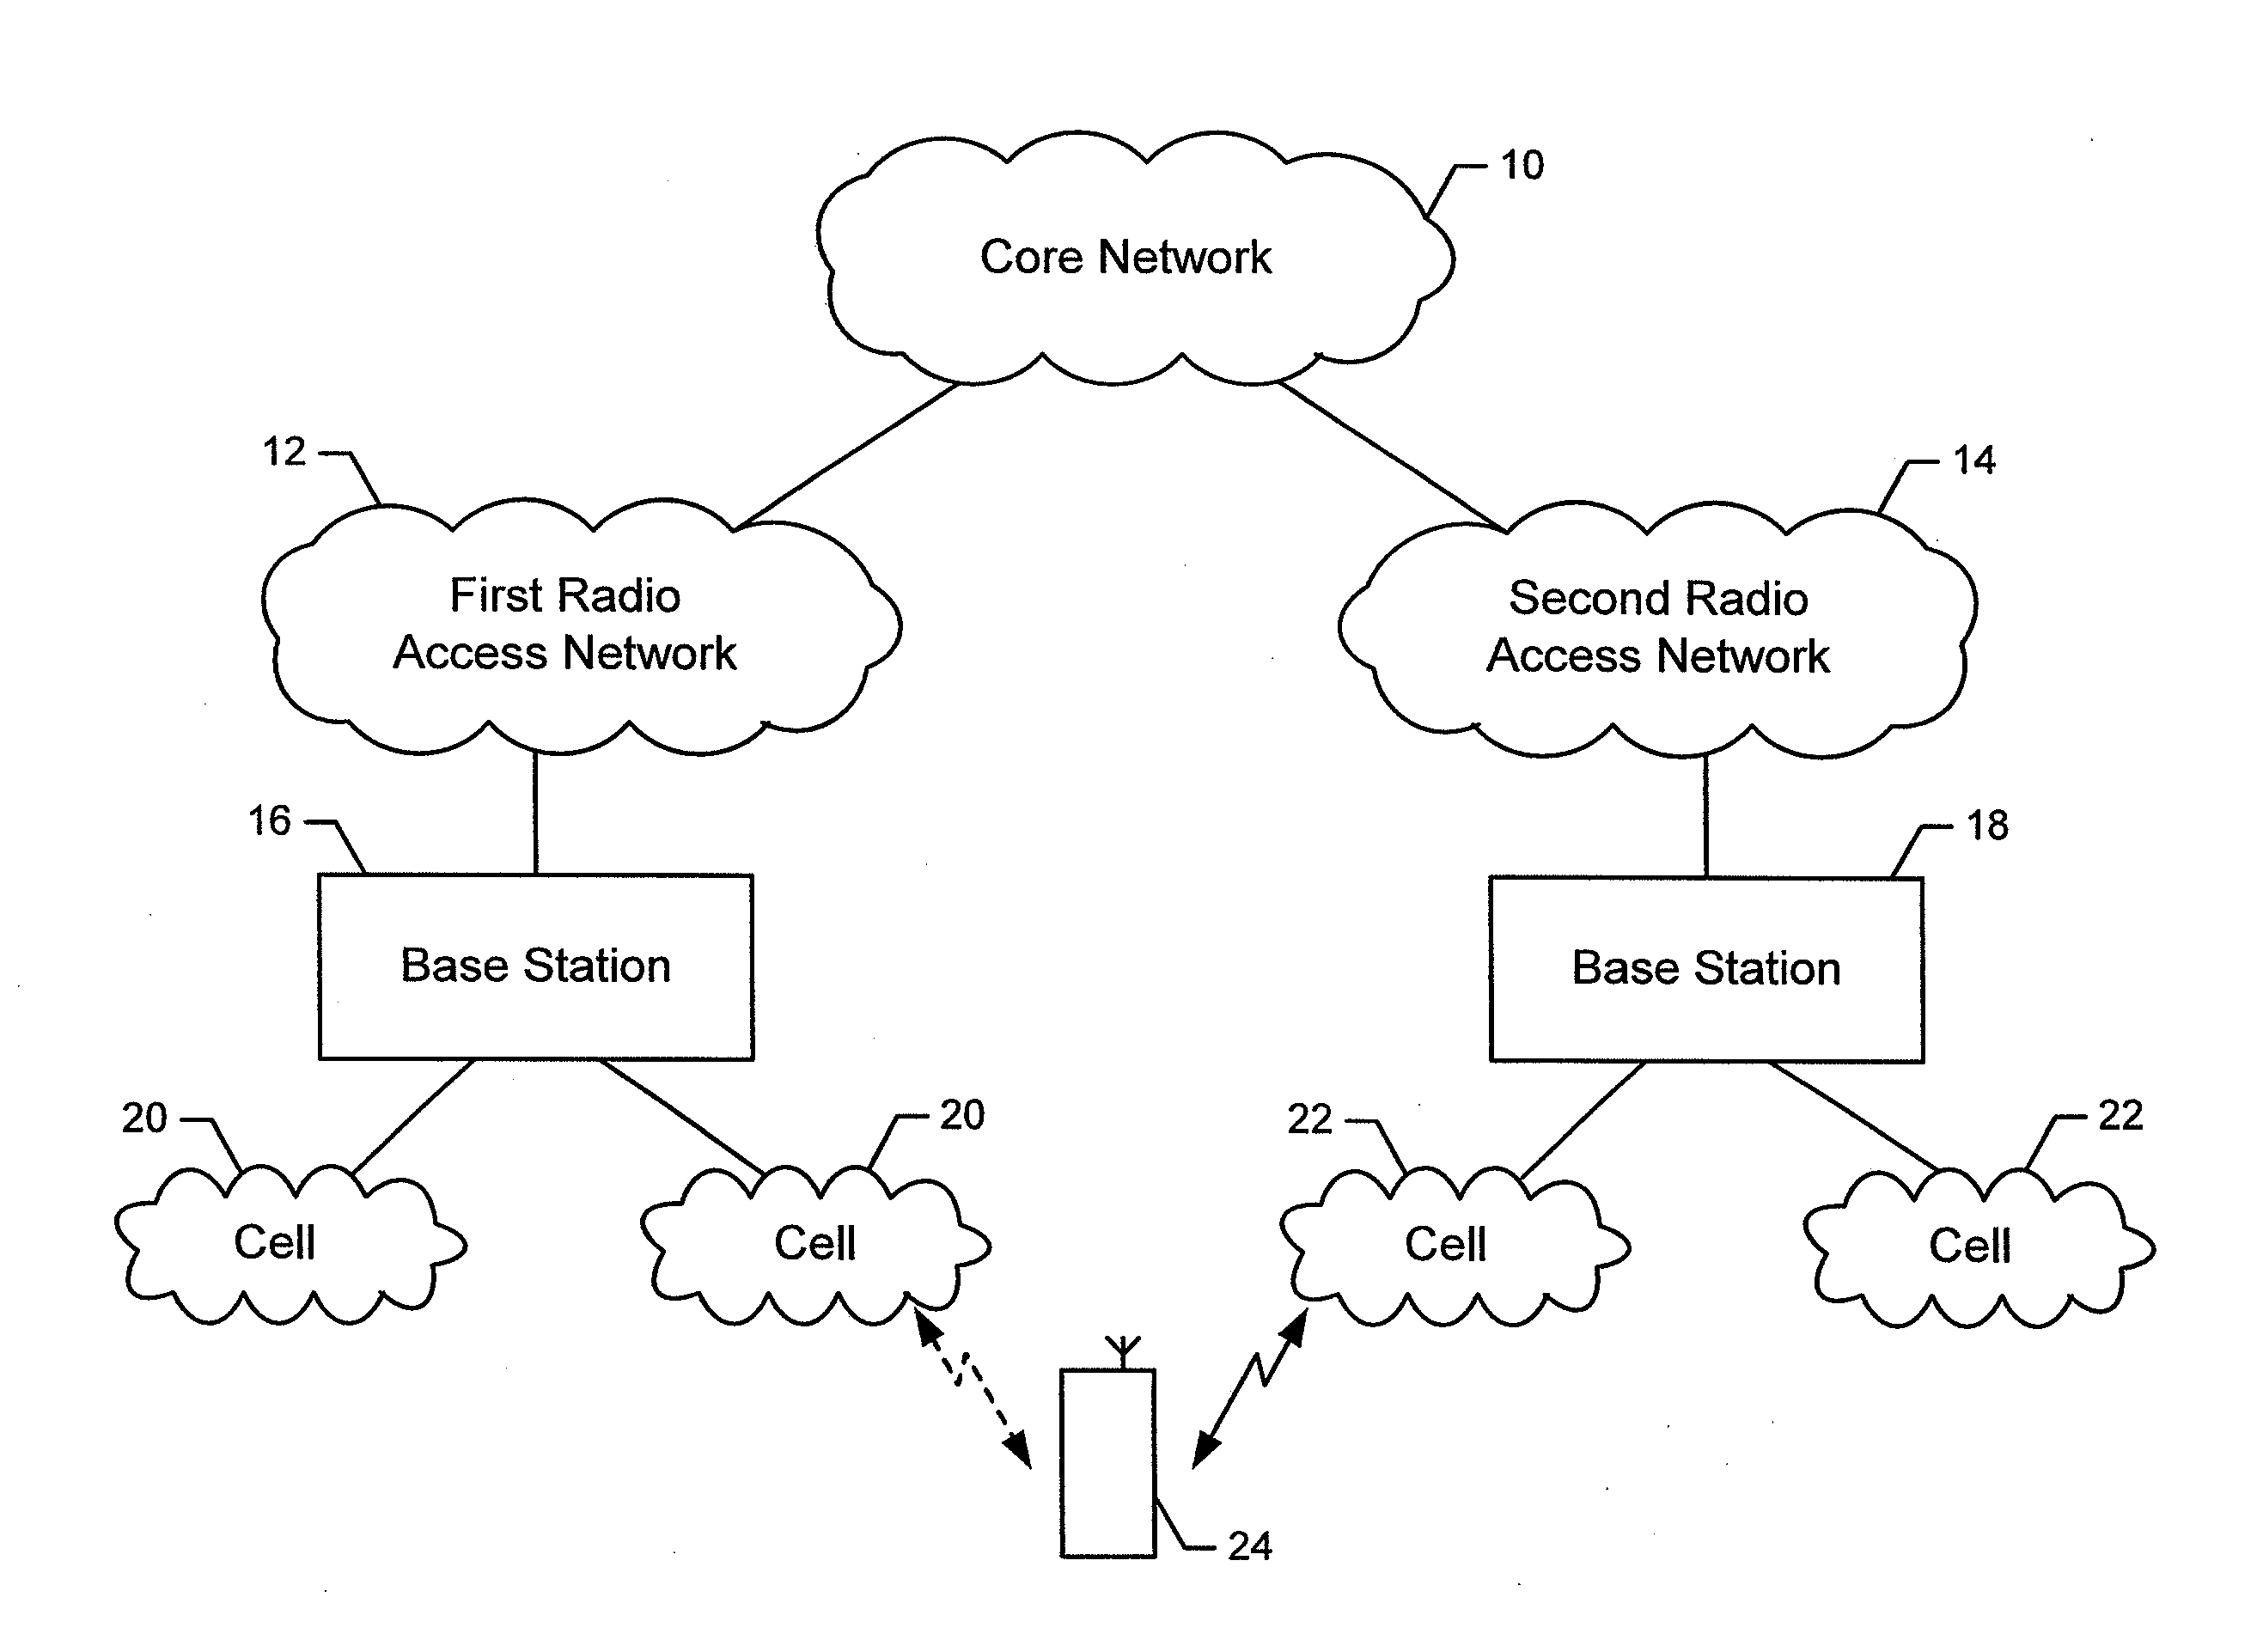 Method and apparatus for intelligently reporting neighbor information to facilitate automatic neighbor relations